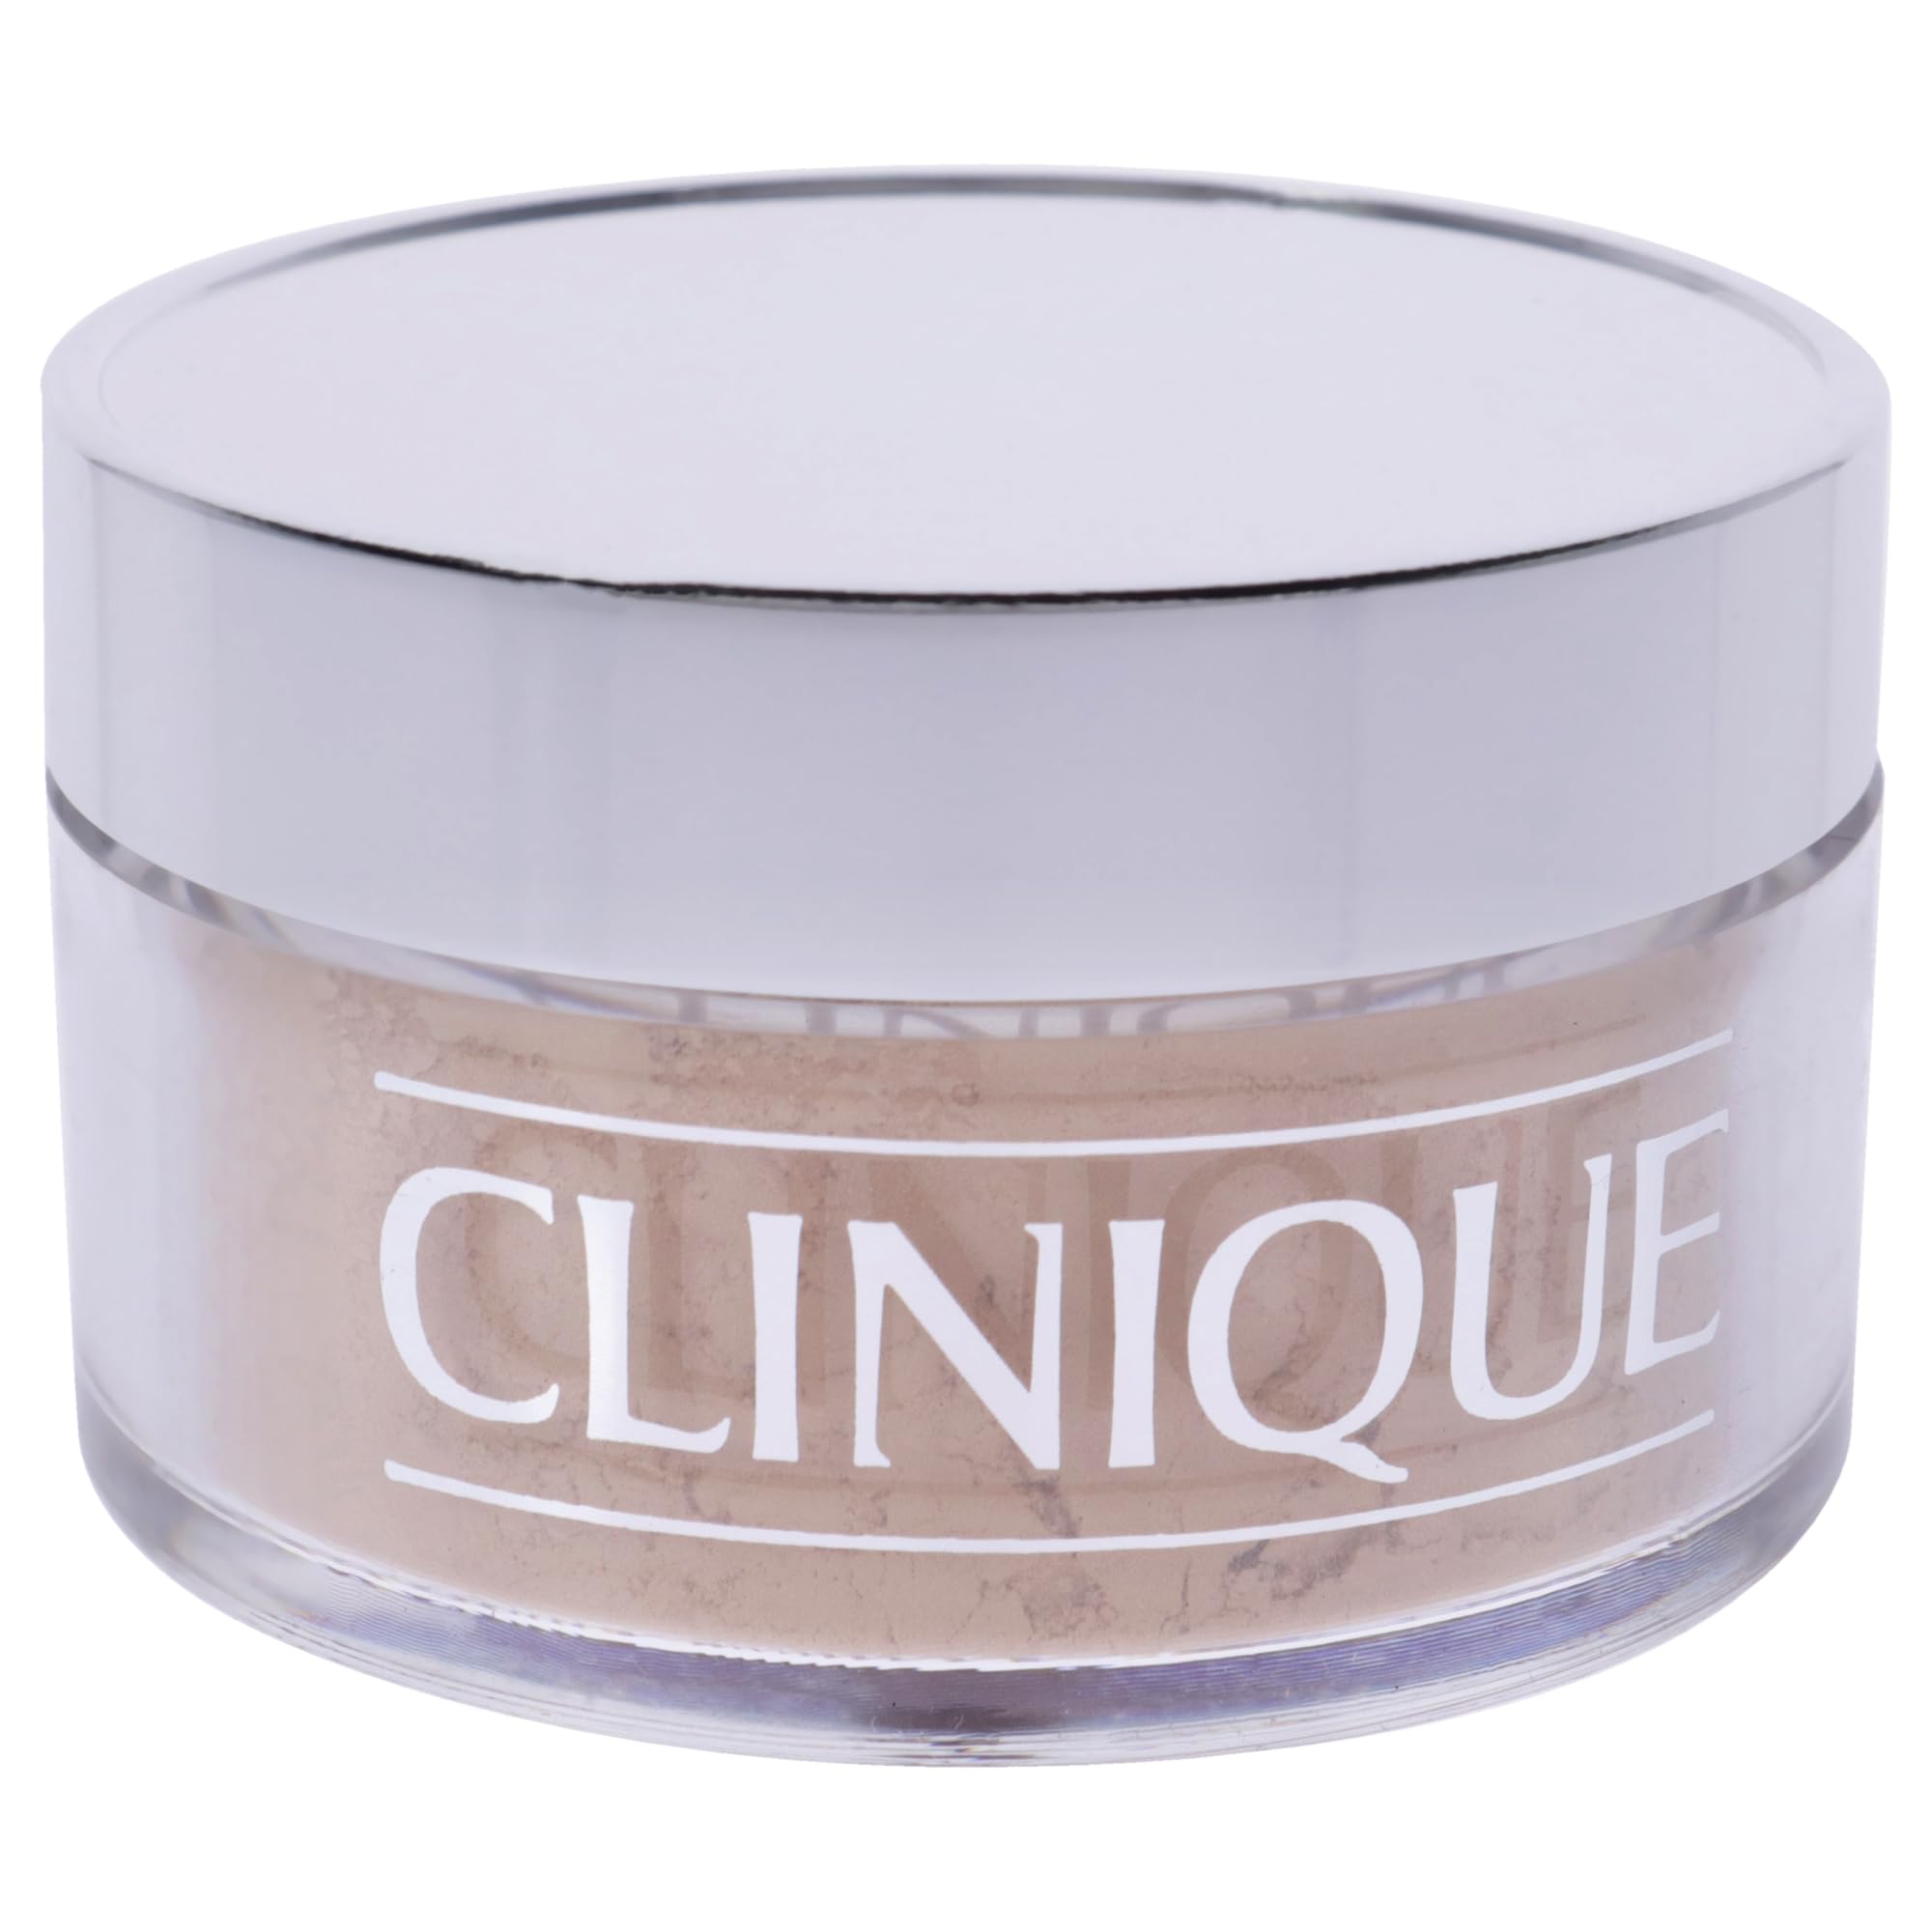 Blended Face Powder- 03 Transparency by Clinique for Women - 0.88 oz Powder